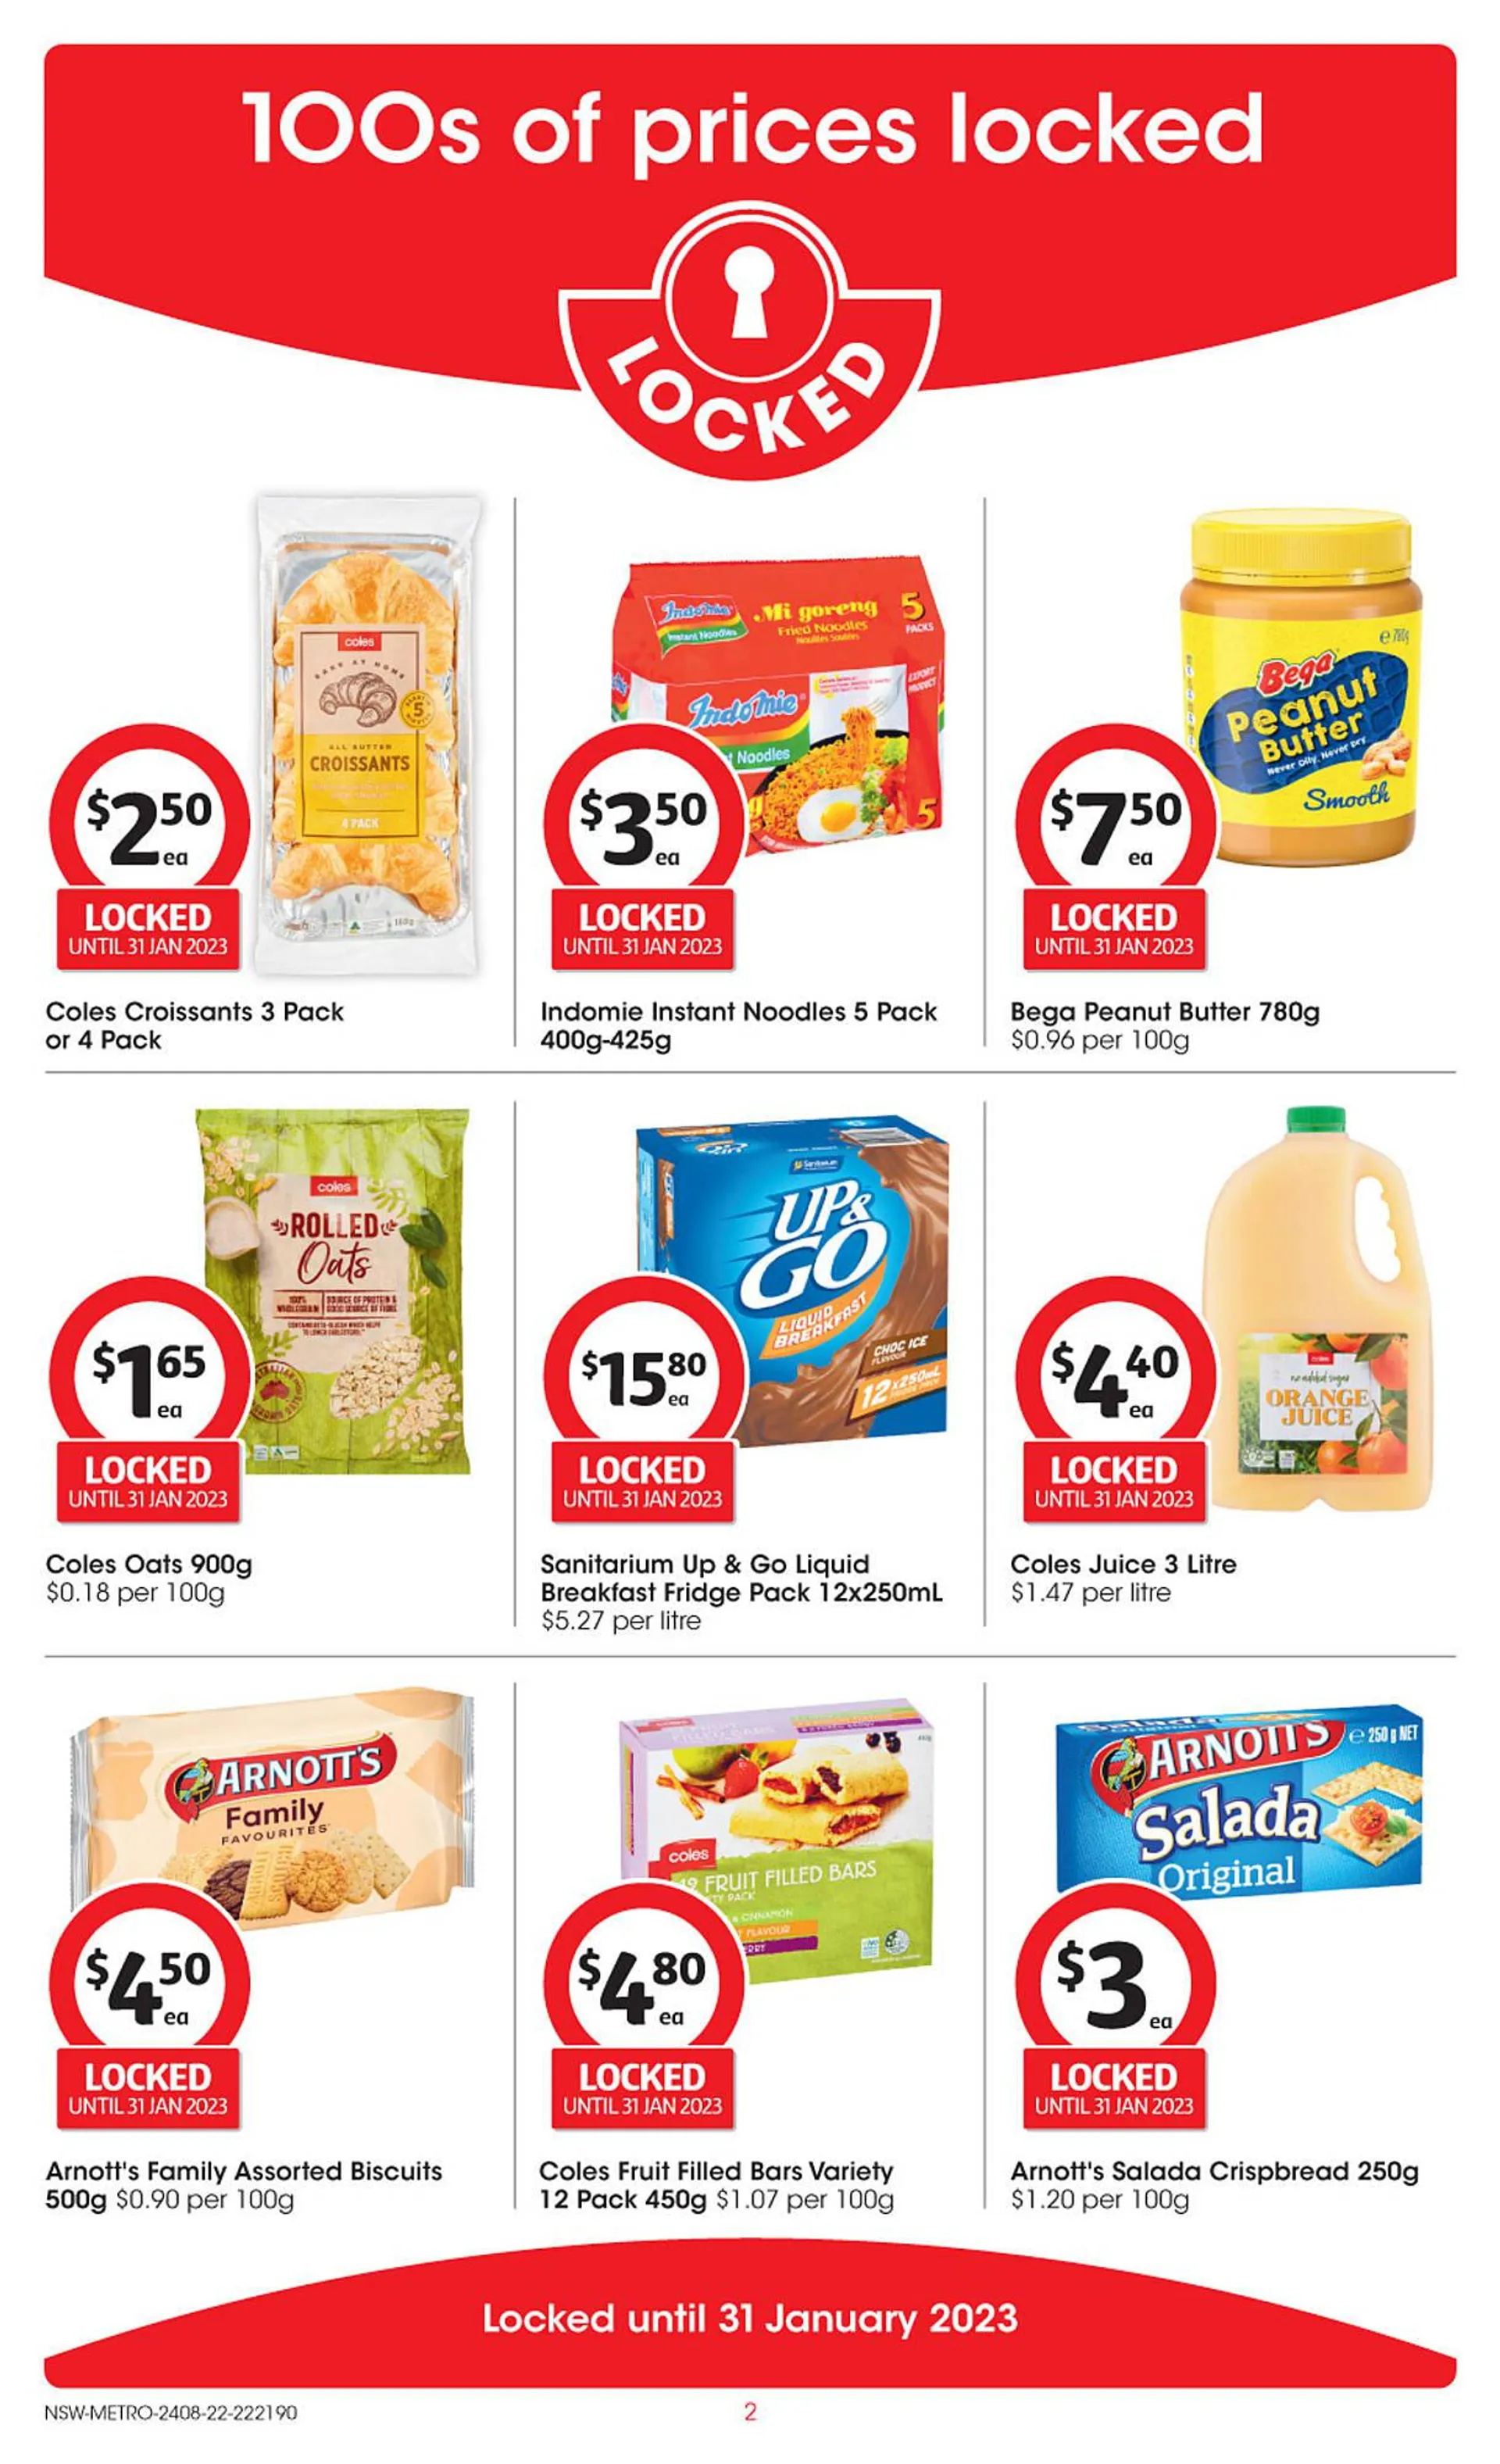 Coles catalogue - 100s of Prices Locked - 2